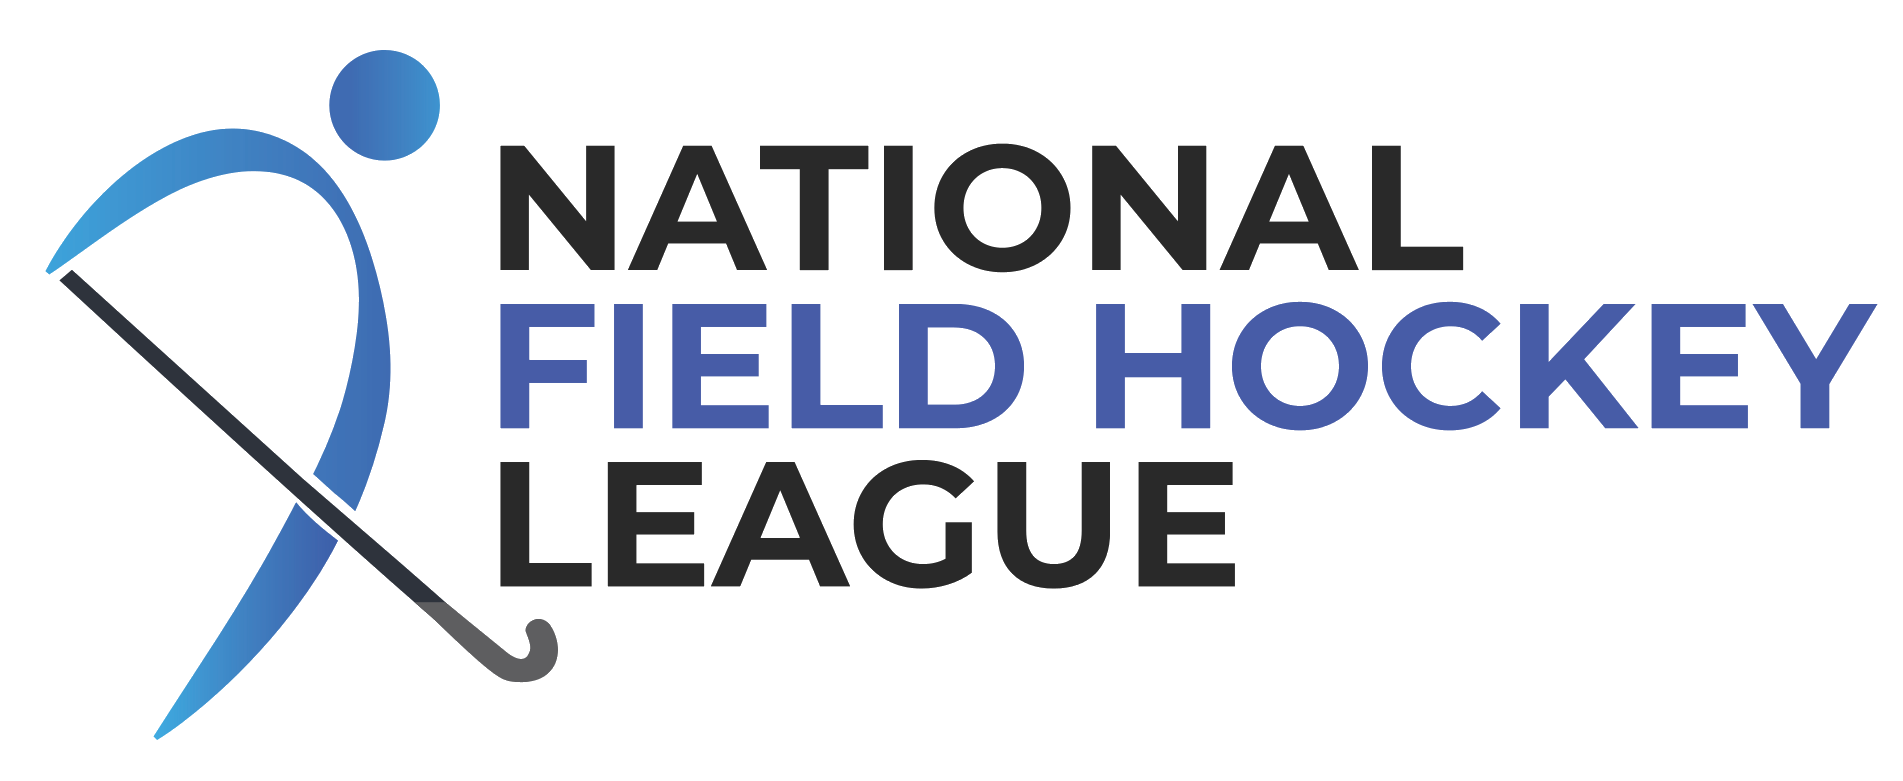 2022 Fall Challenge Cup National Field Hockey League